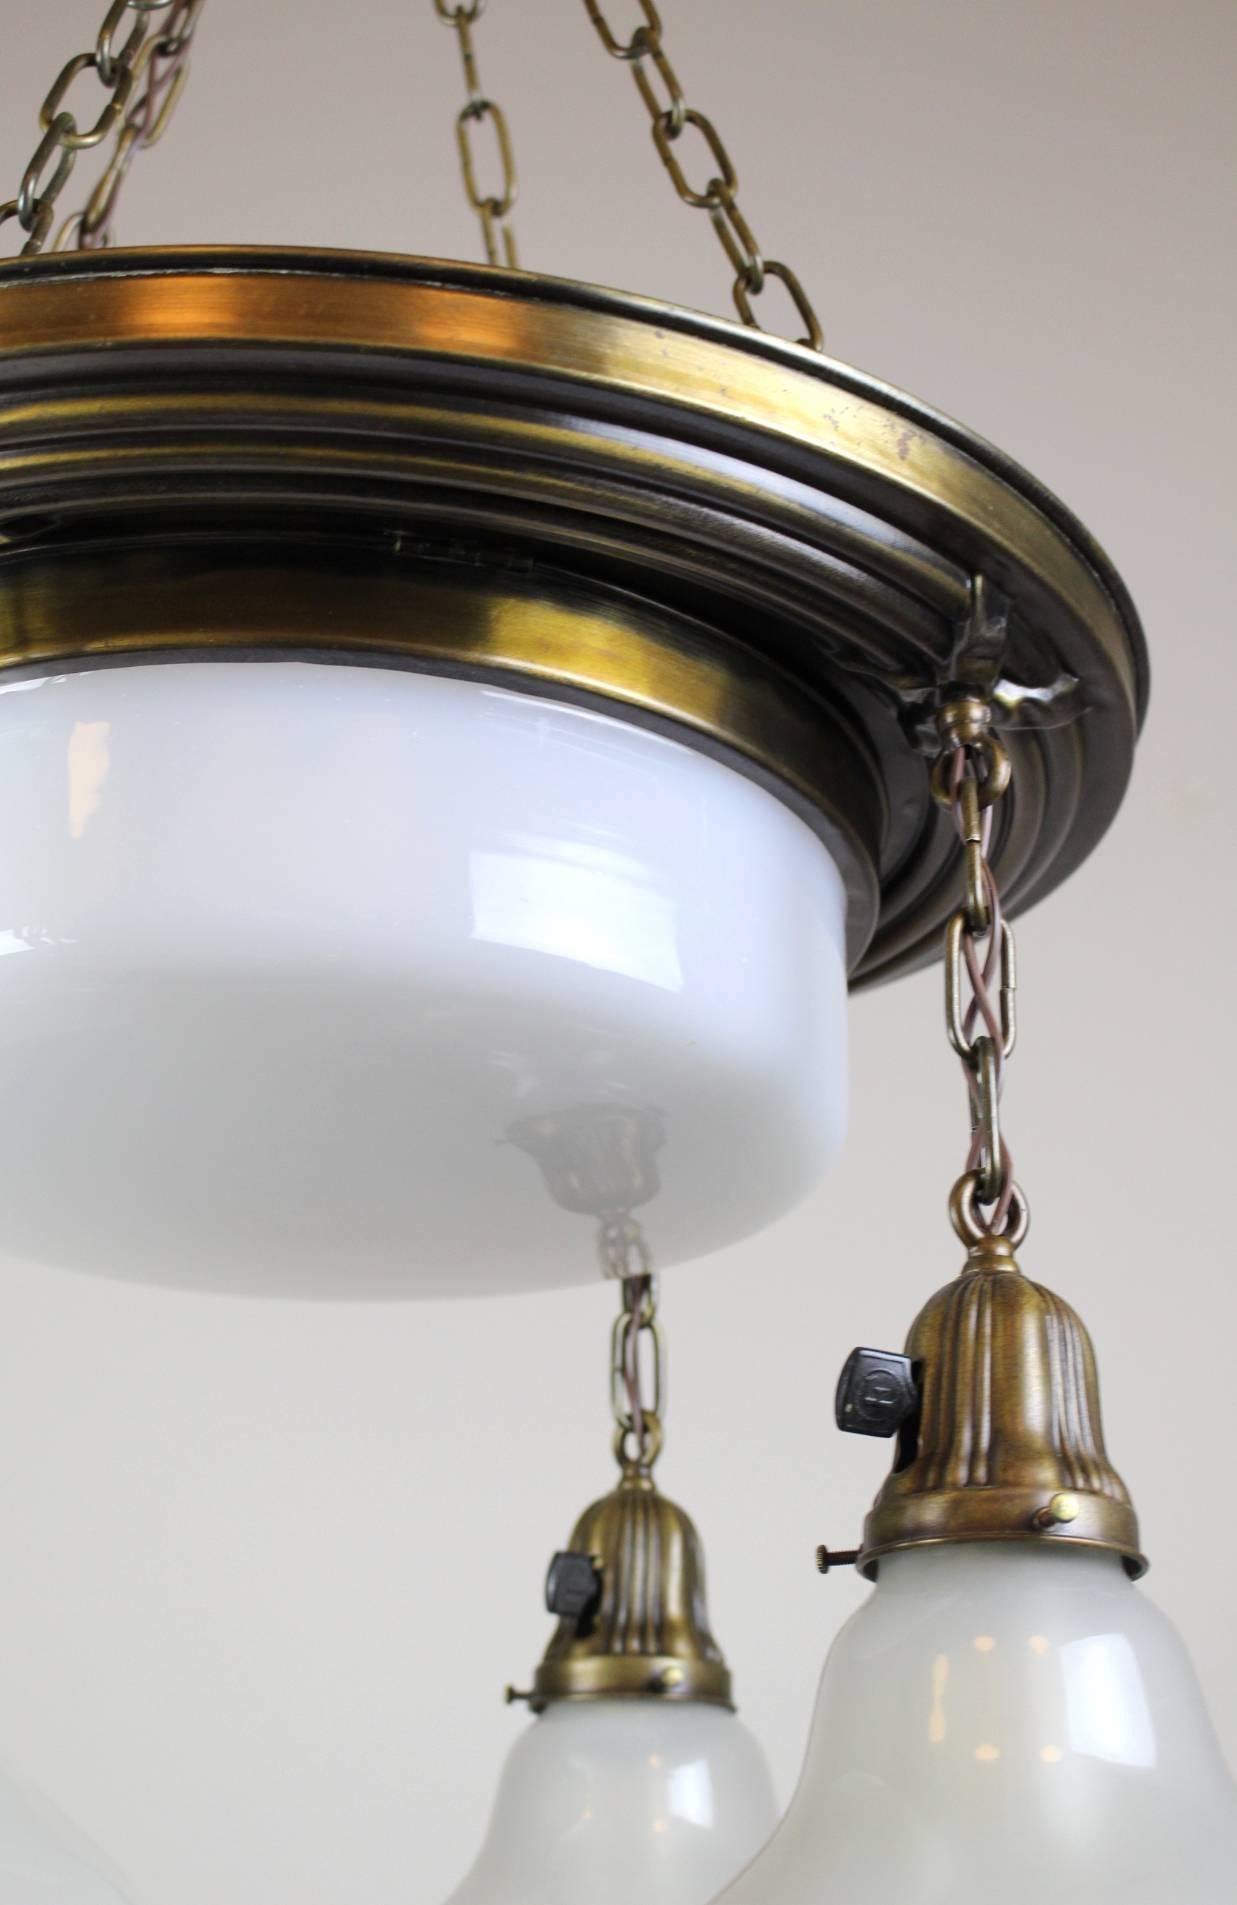 Early 20th Century Classical Revival Shower Fixture For Sale